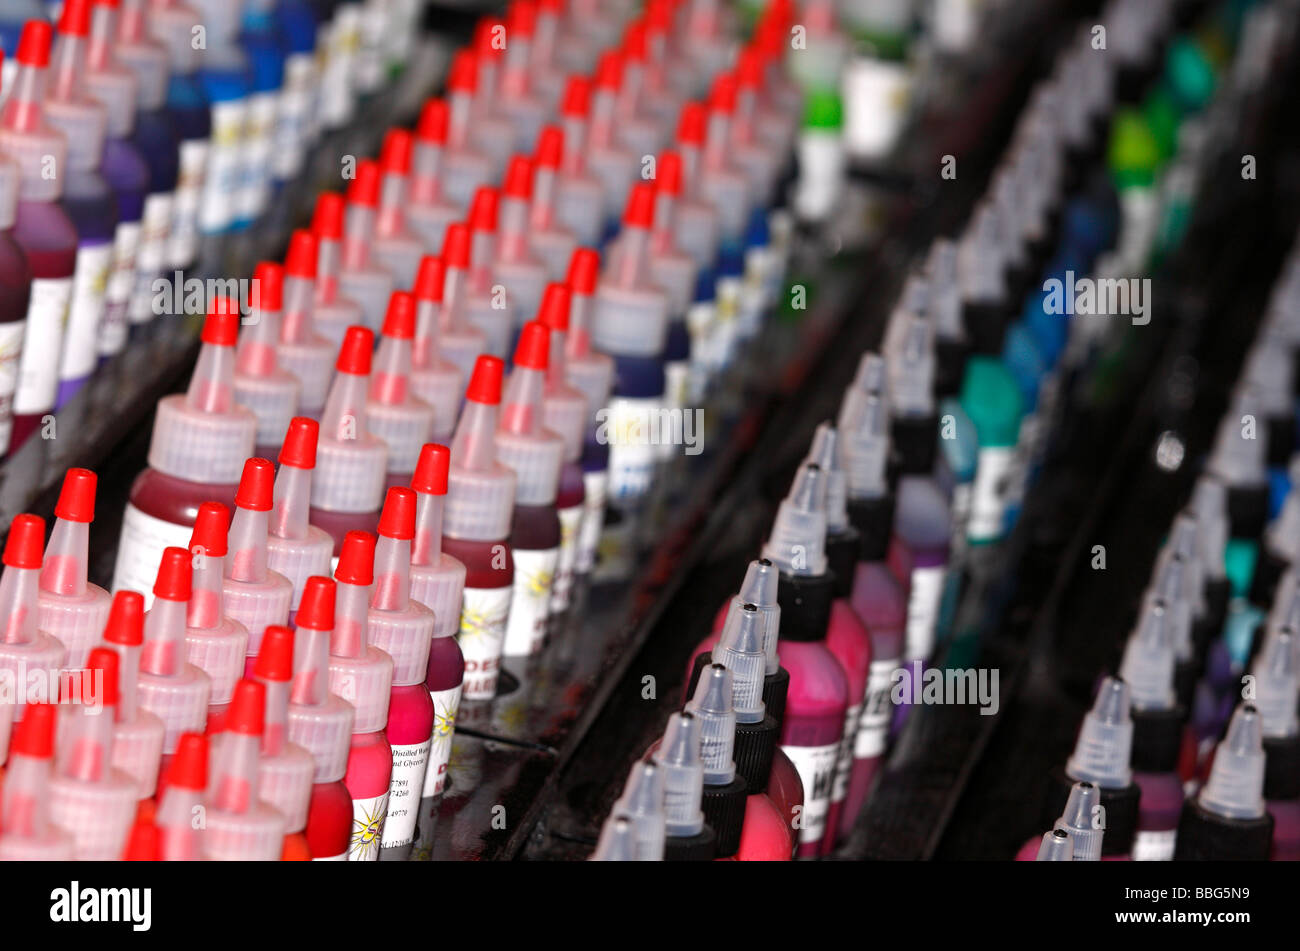 Row of colors for tattooing Stock Photo